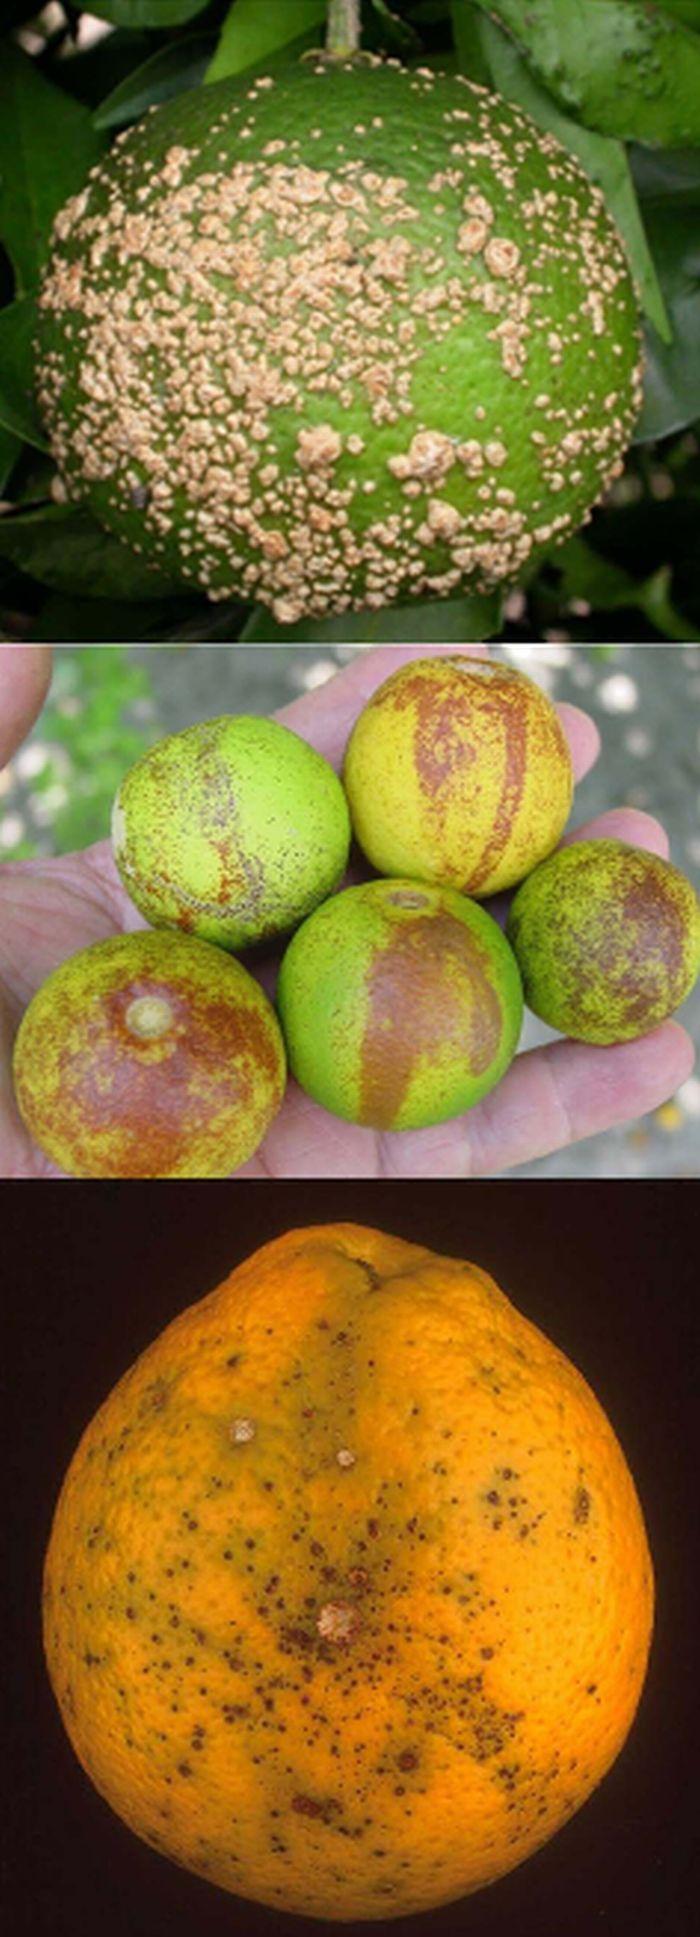 Dooryard Citrus Production: Citrus Canker Disease 5 Melanose lesions are small, raised dots, pustules, and irregularly shaped spots ranging from brick red to black that feel like sandpaper when